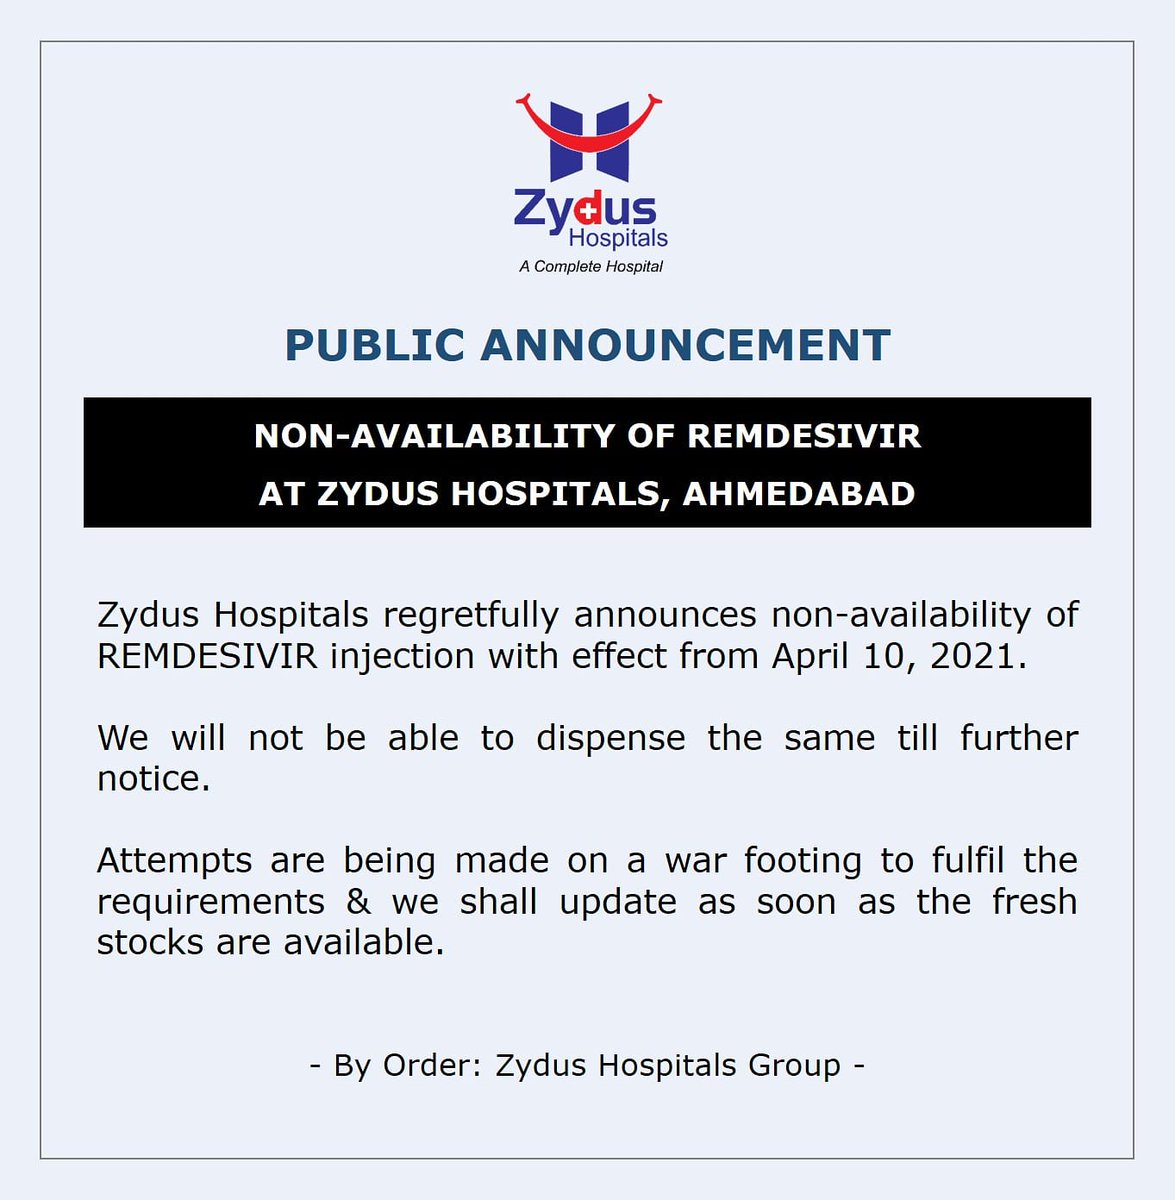 We regret to inform that #REMDAC #Remdesivir from #ZydusCadila will not be available from 10th April, 2021.

We, as always, will stand by you in these trying times and we shall update as soon as the stocks are available.

#COVID19 #COVID19medication #ZydusHospitals #Ahmedabad https://t.co/i9O8DVWCE8